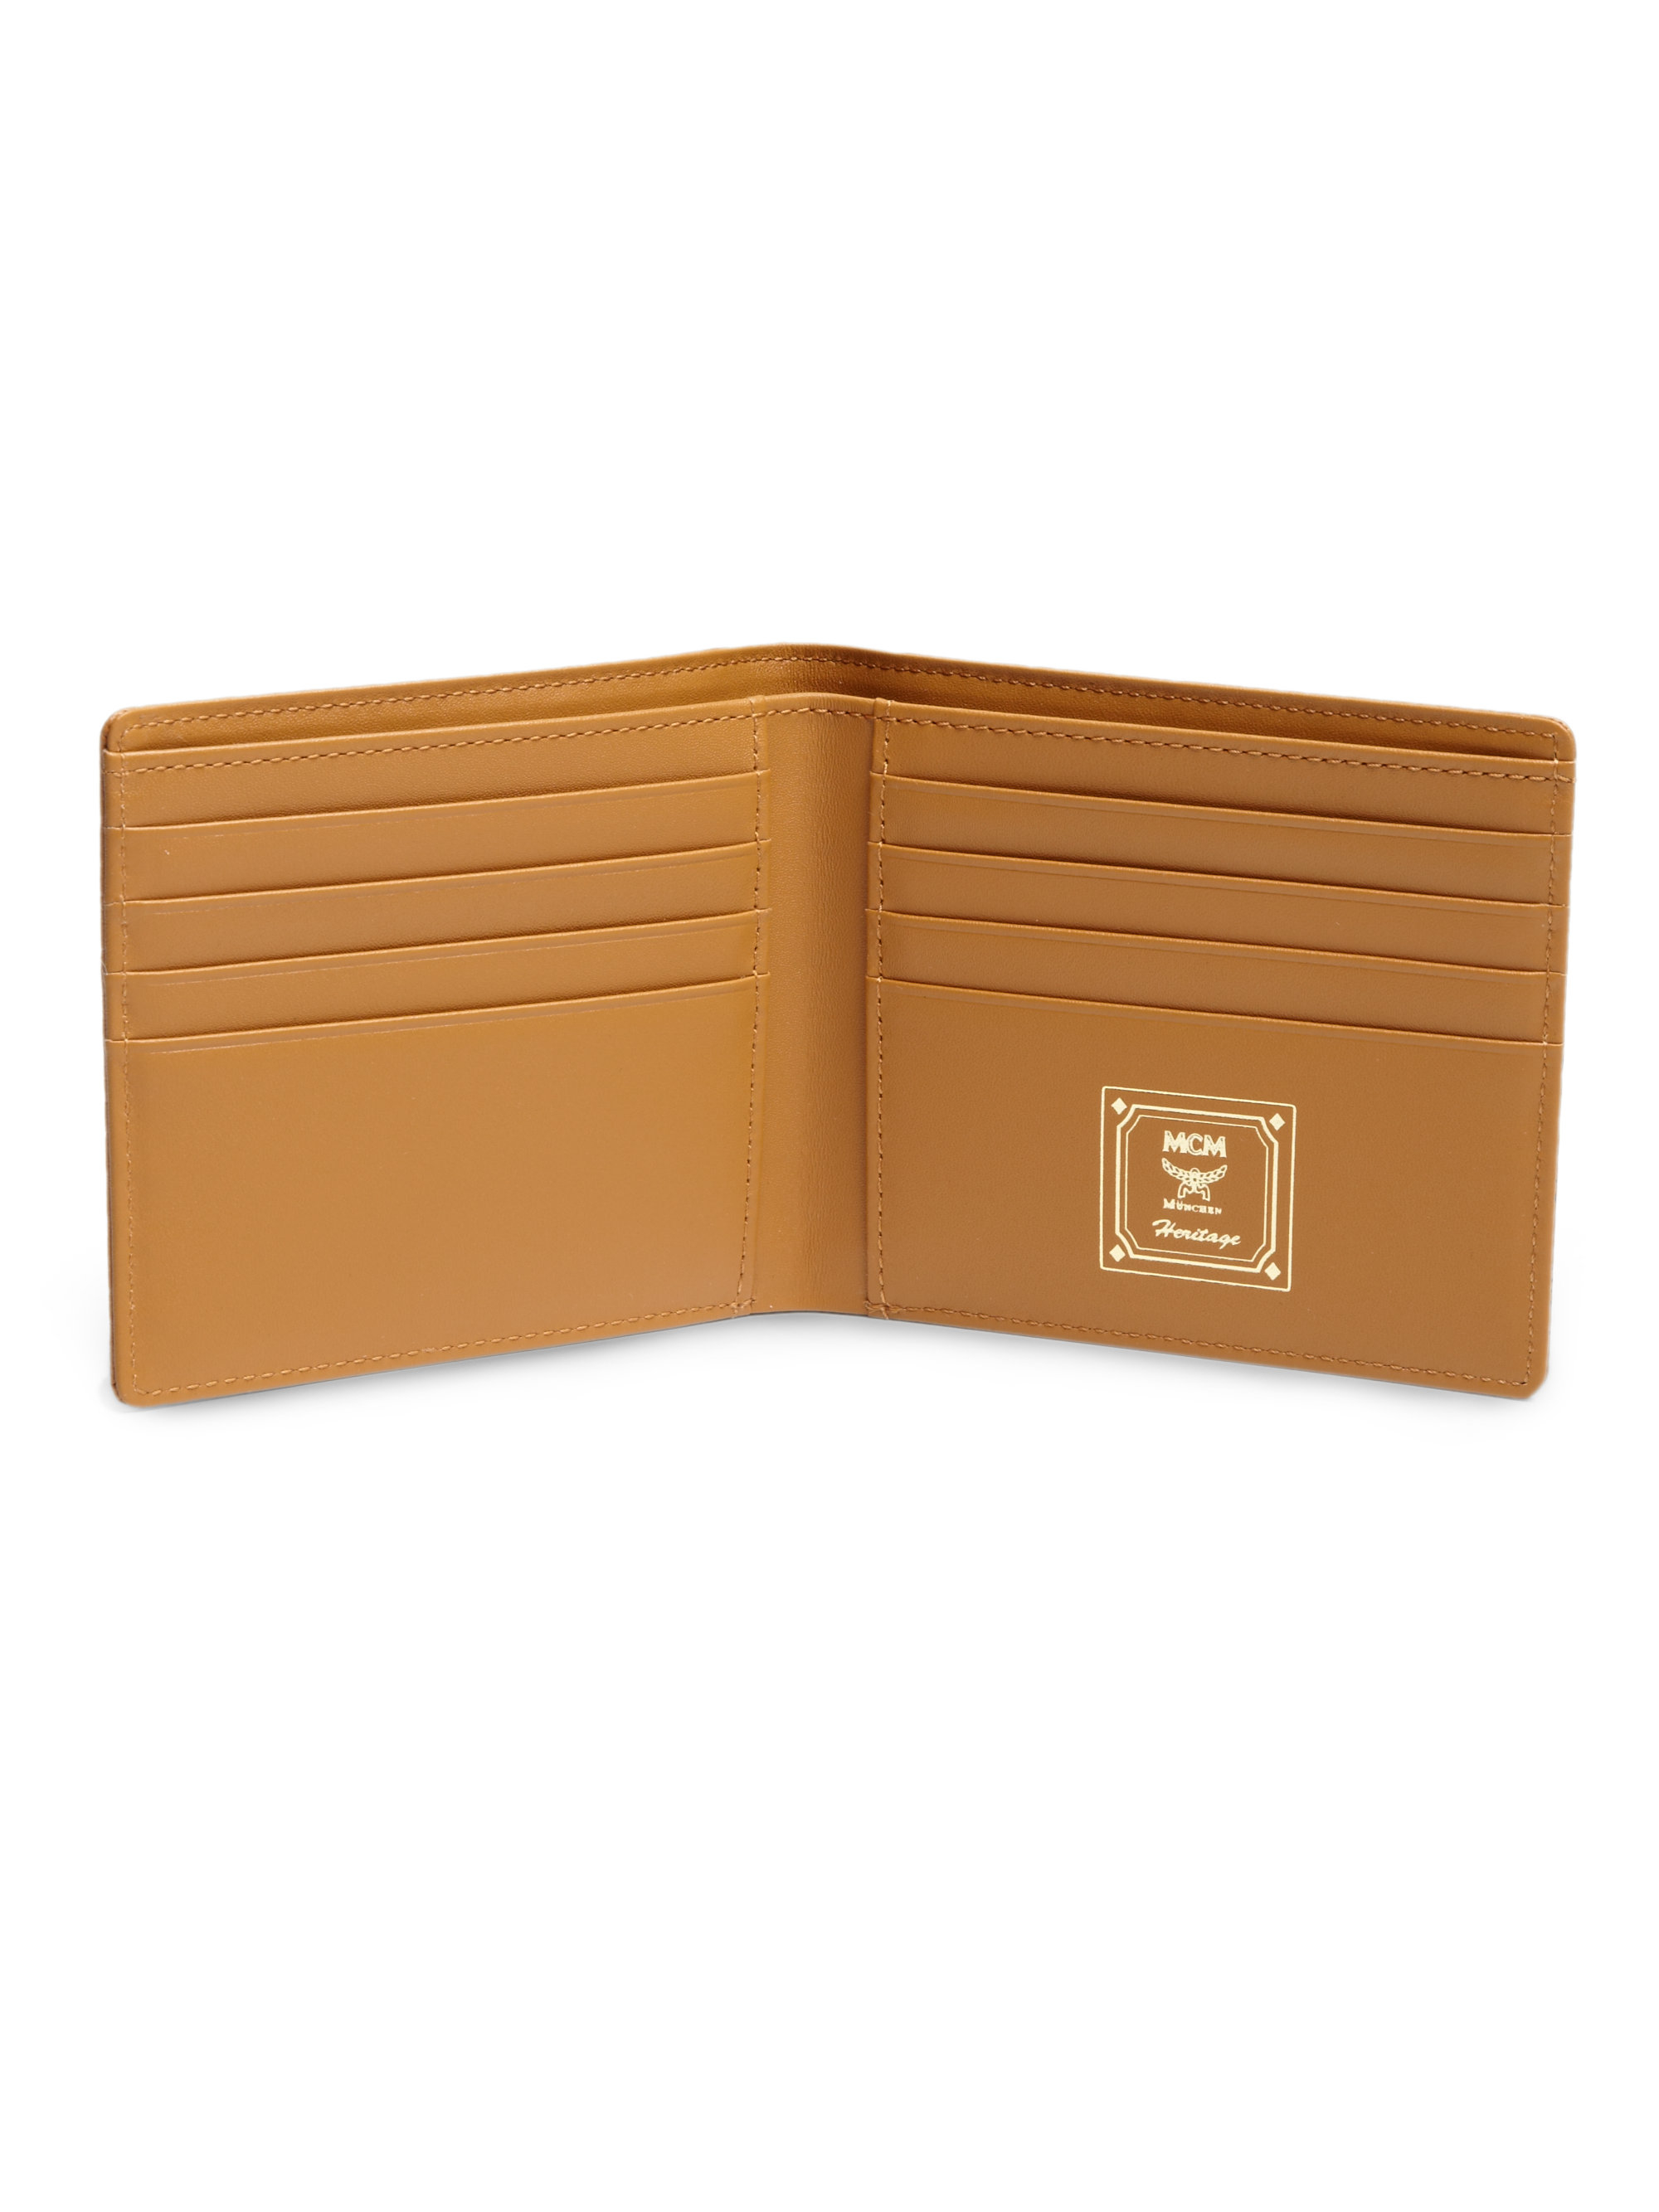 Lyst - Mcm Heritage Small Wallet in Brown for Men